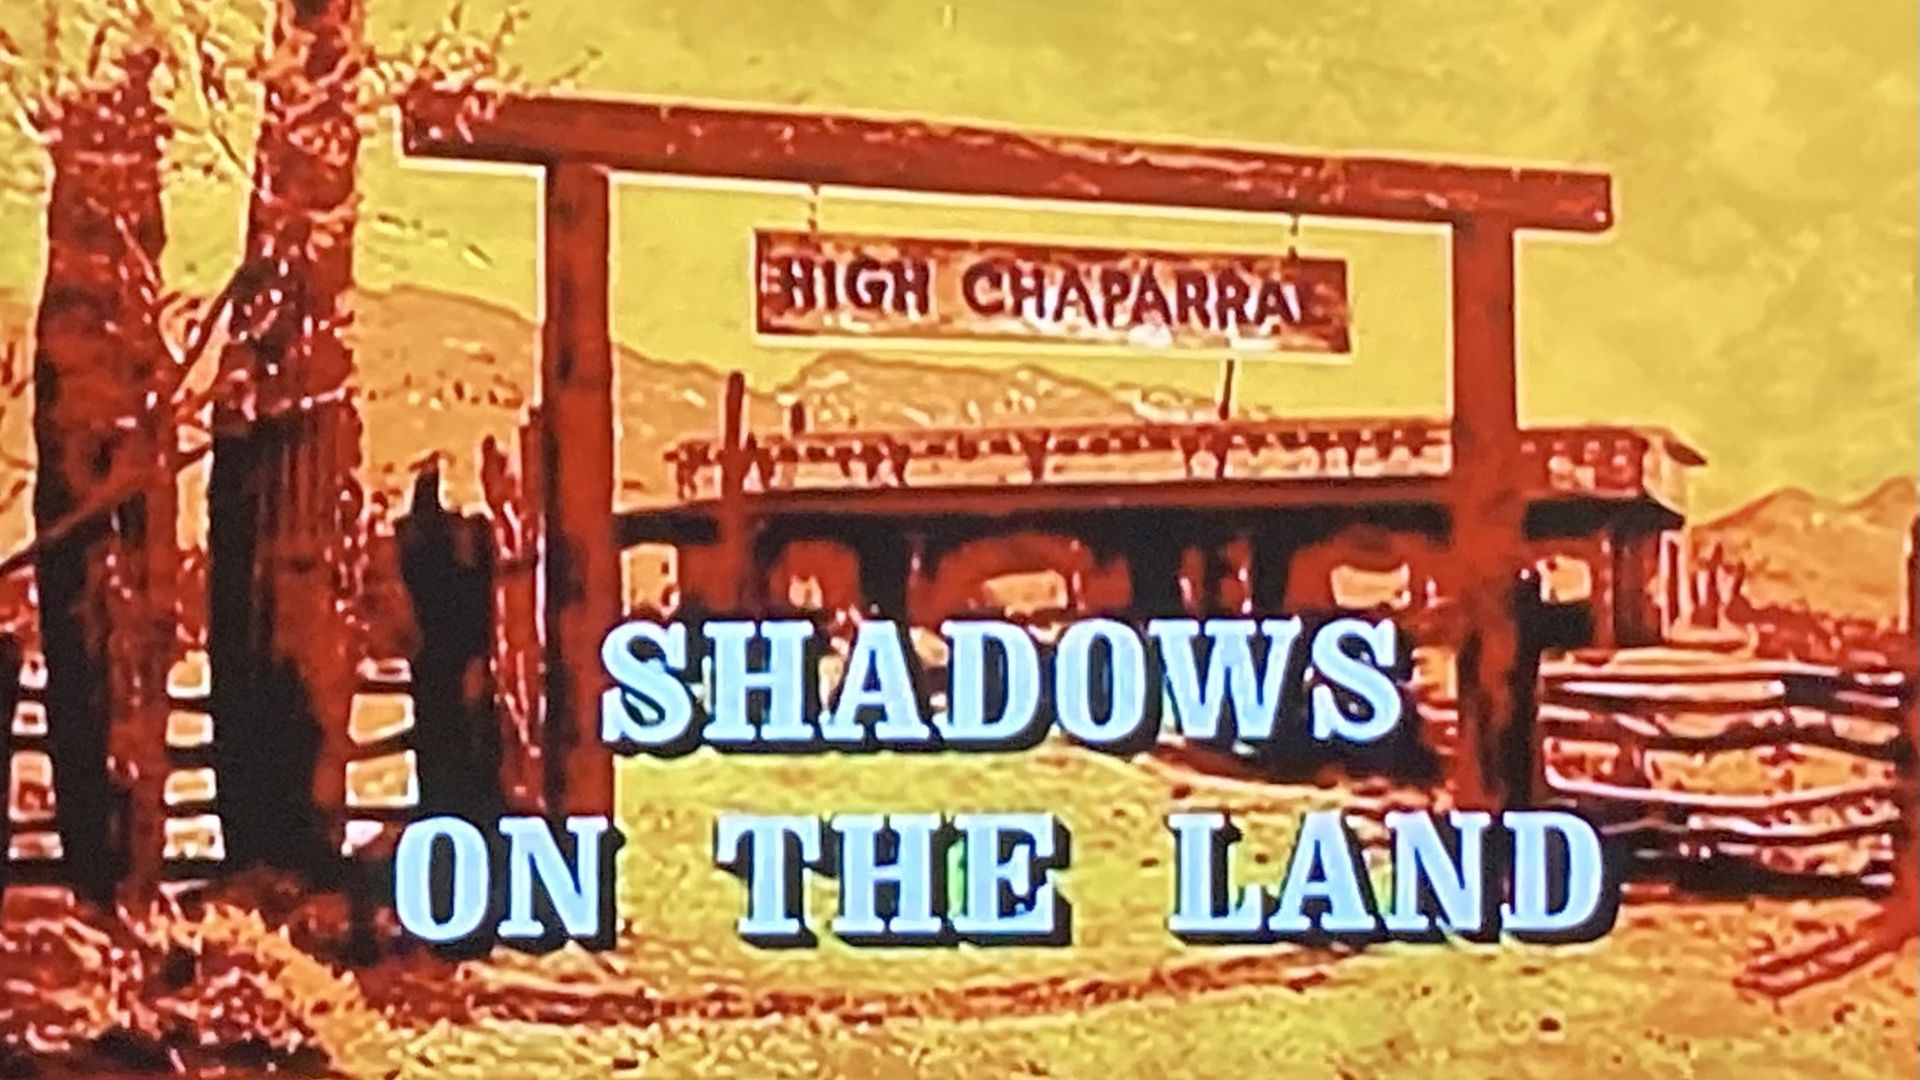 The High Chaparral background